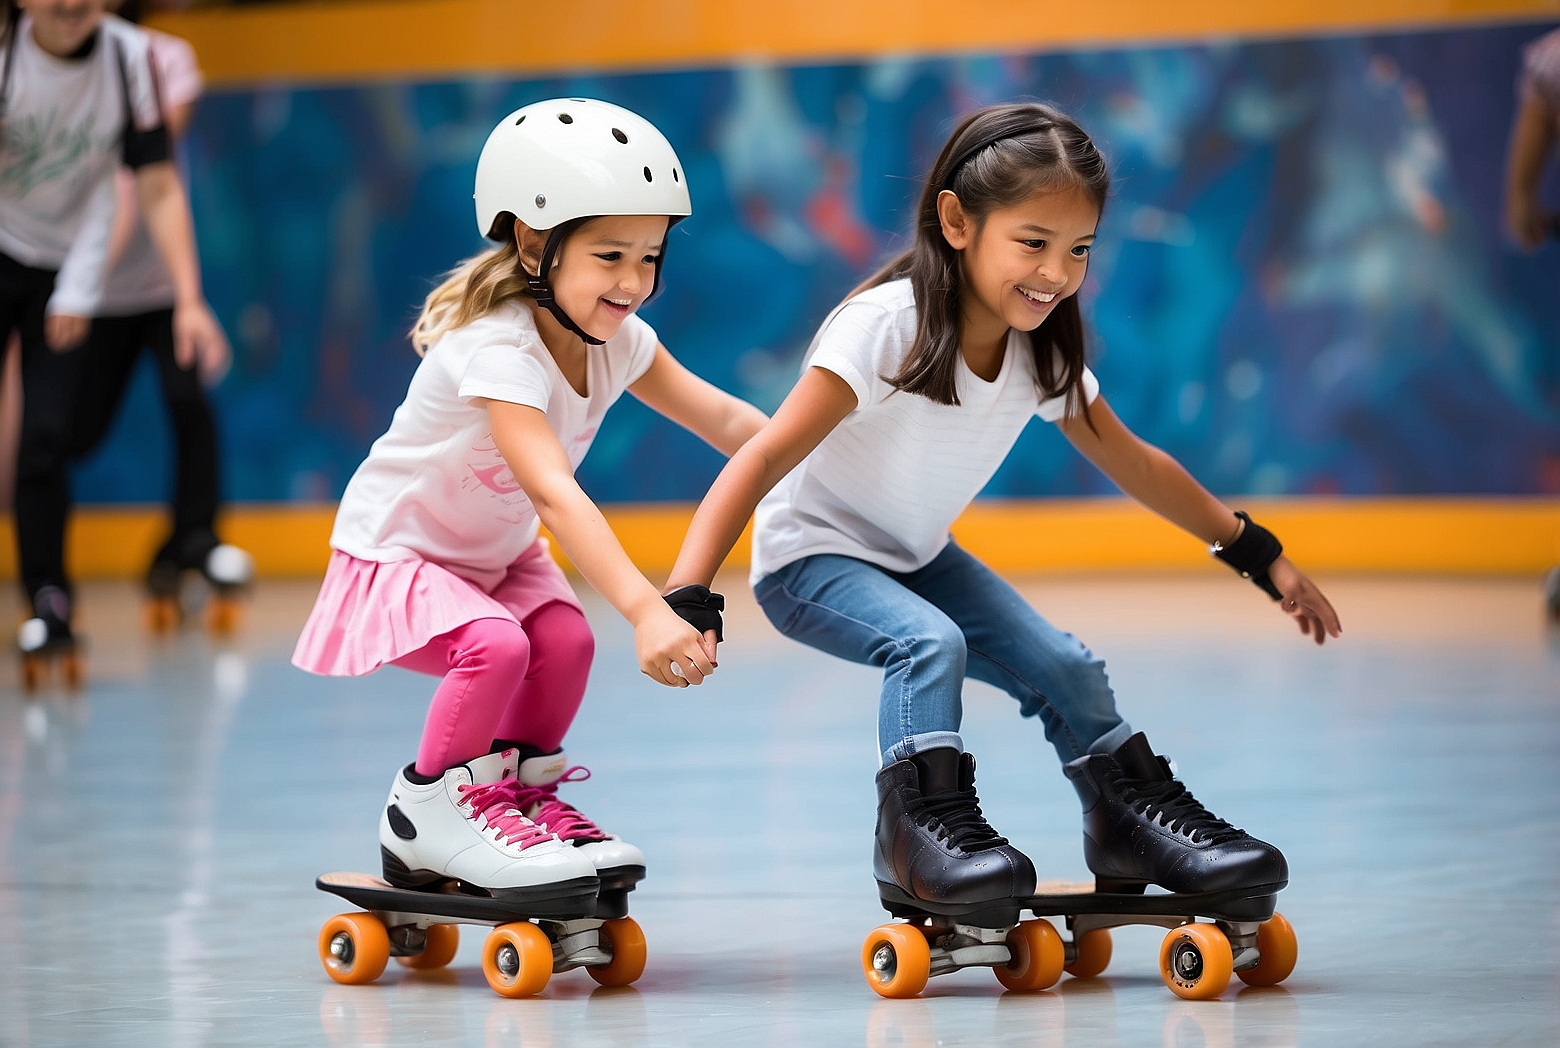 The Ultimate Guide: Teaching Your Kid to Roller Skate